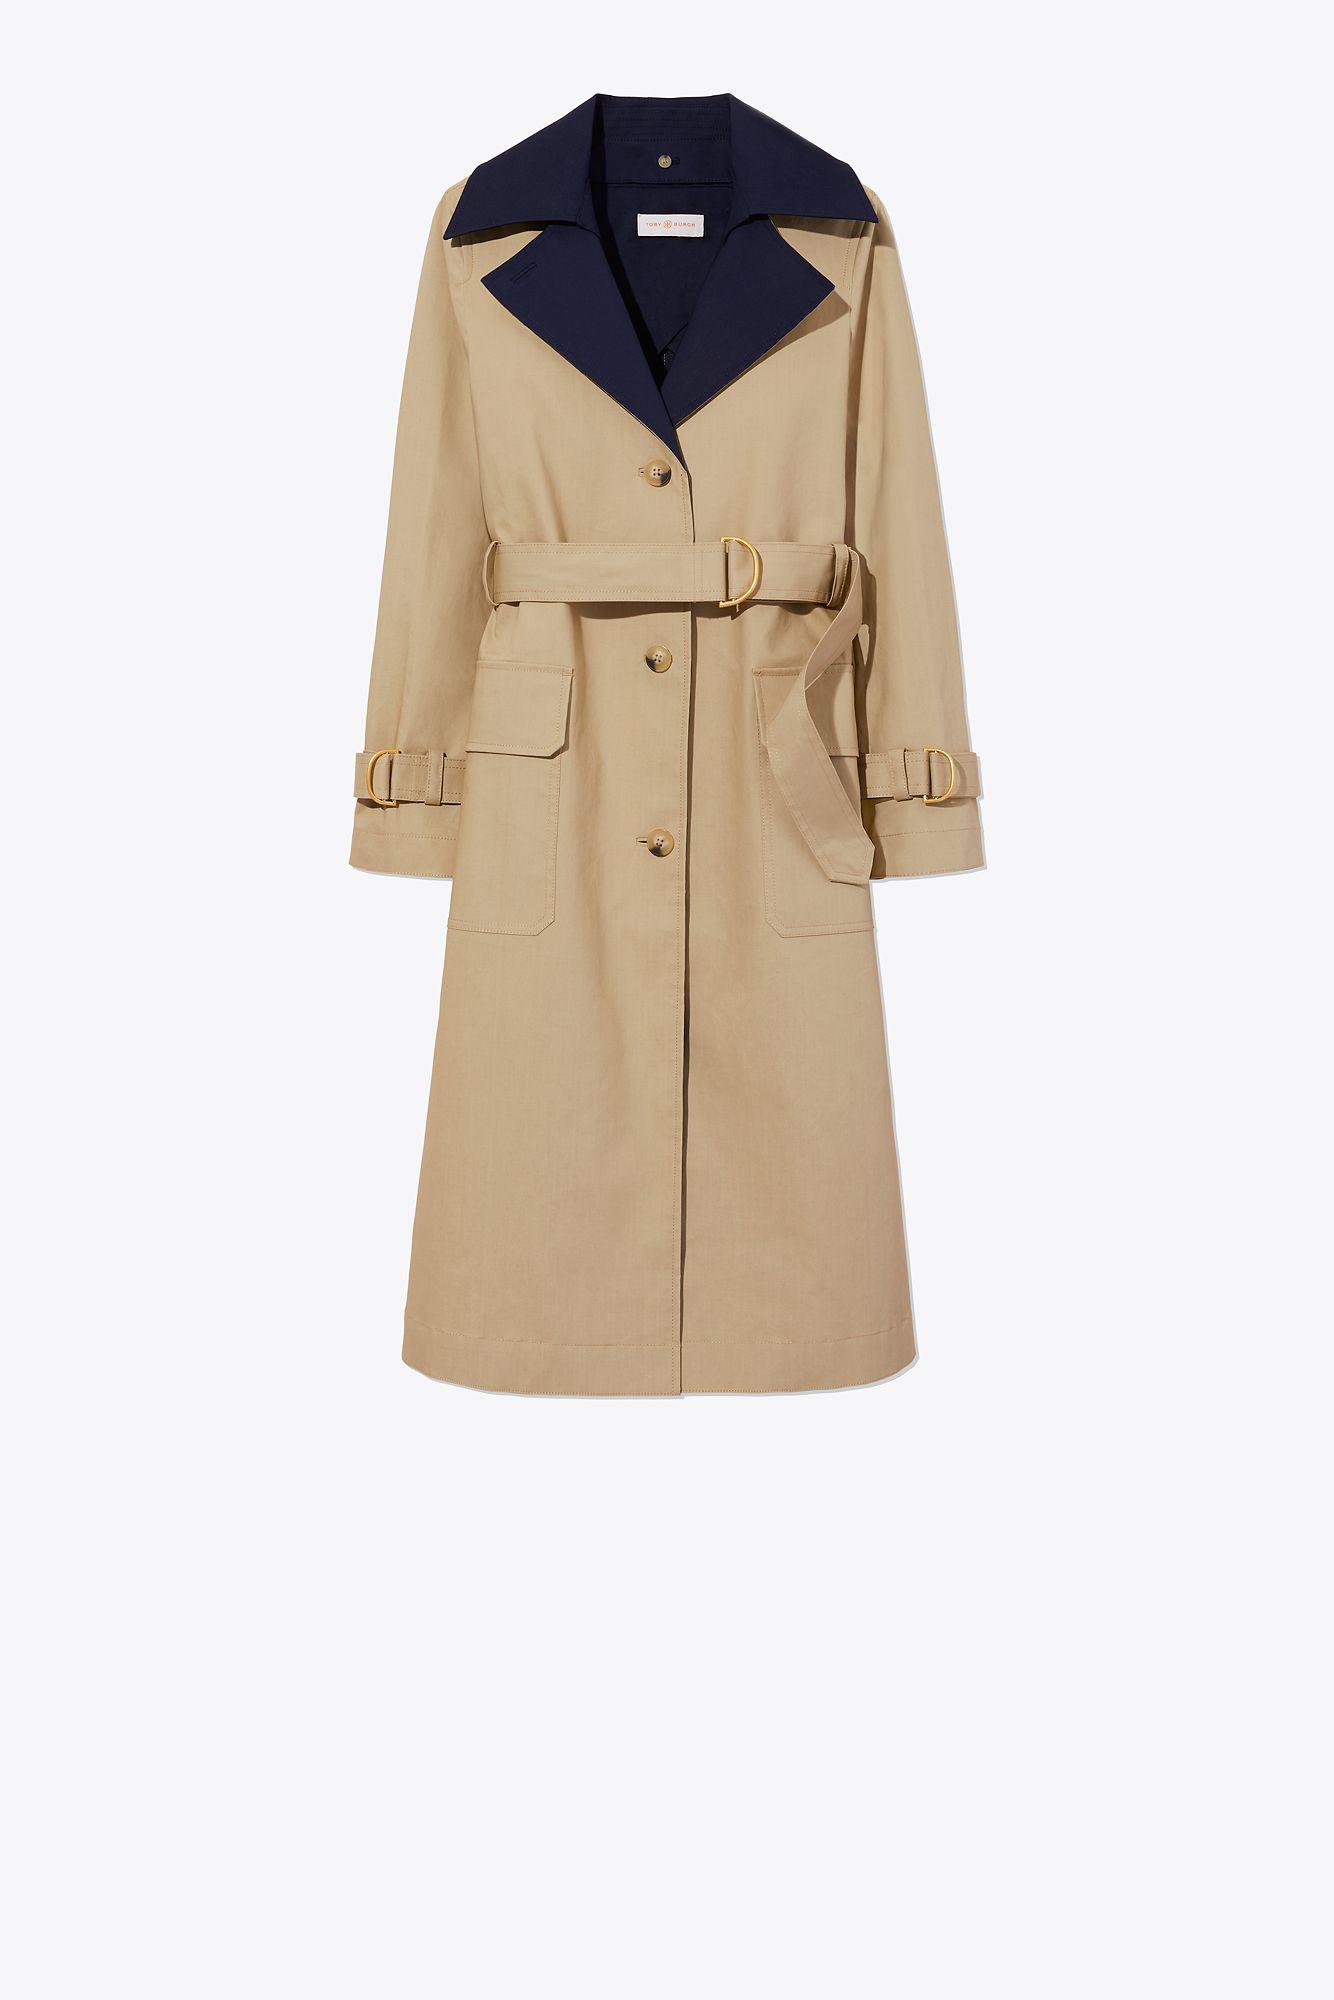 Tory Burch Ashby Cotton Trench Coat in Beige (Natural) - Lyst